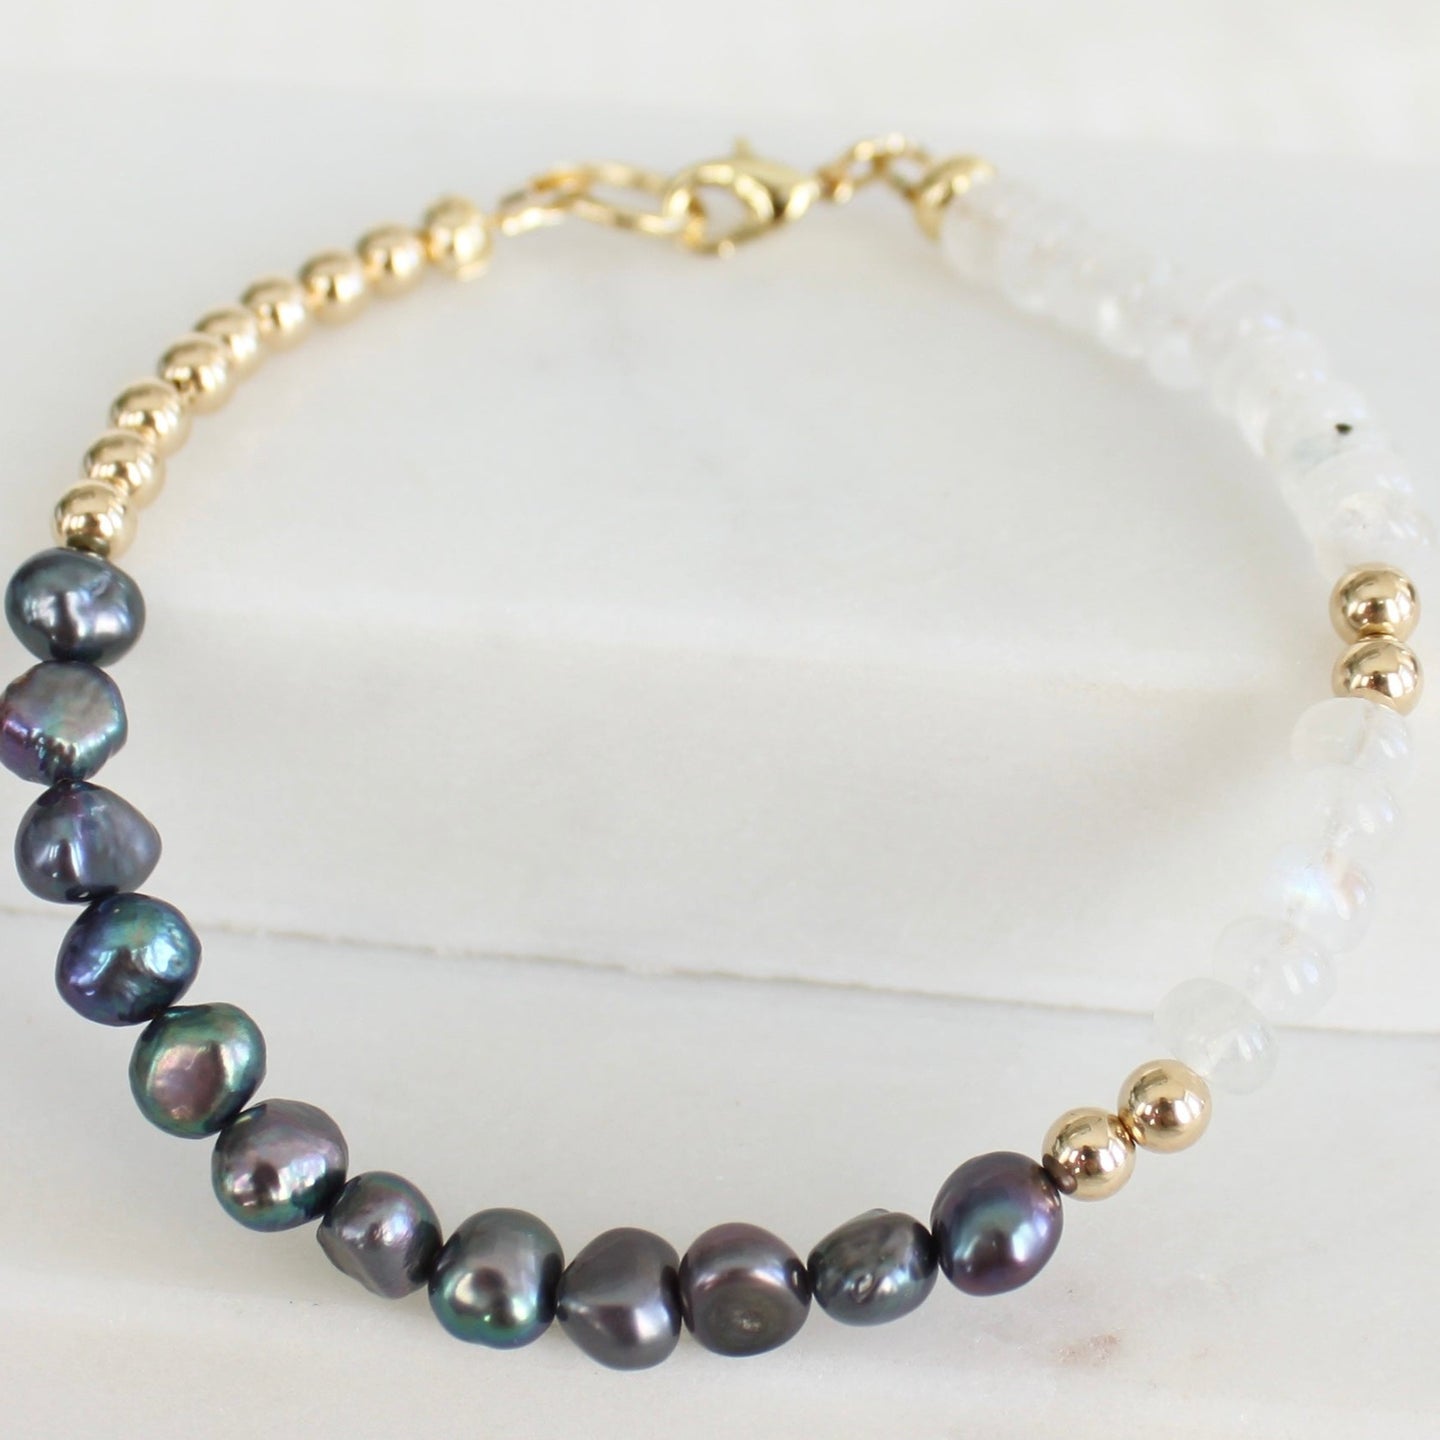 The Black Pearl and Moonstone Bracelet